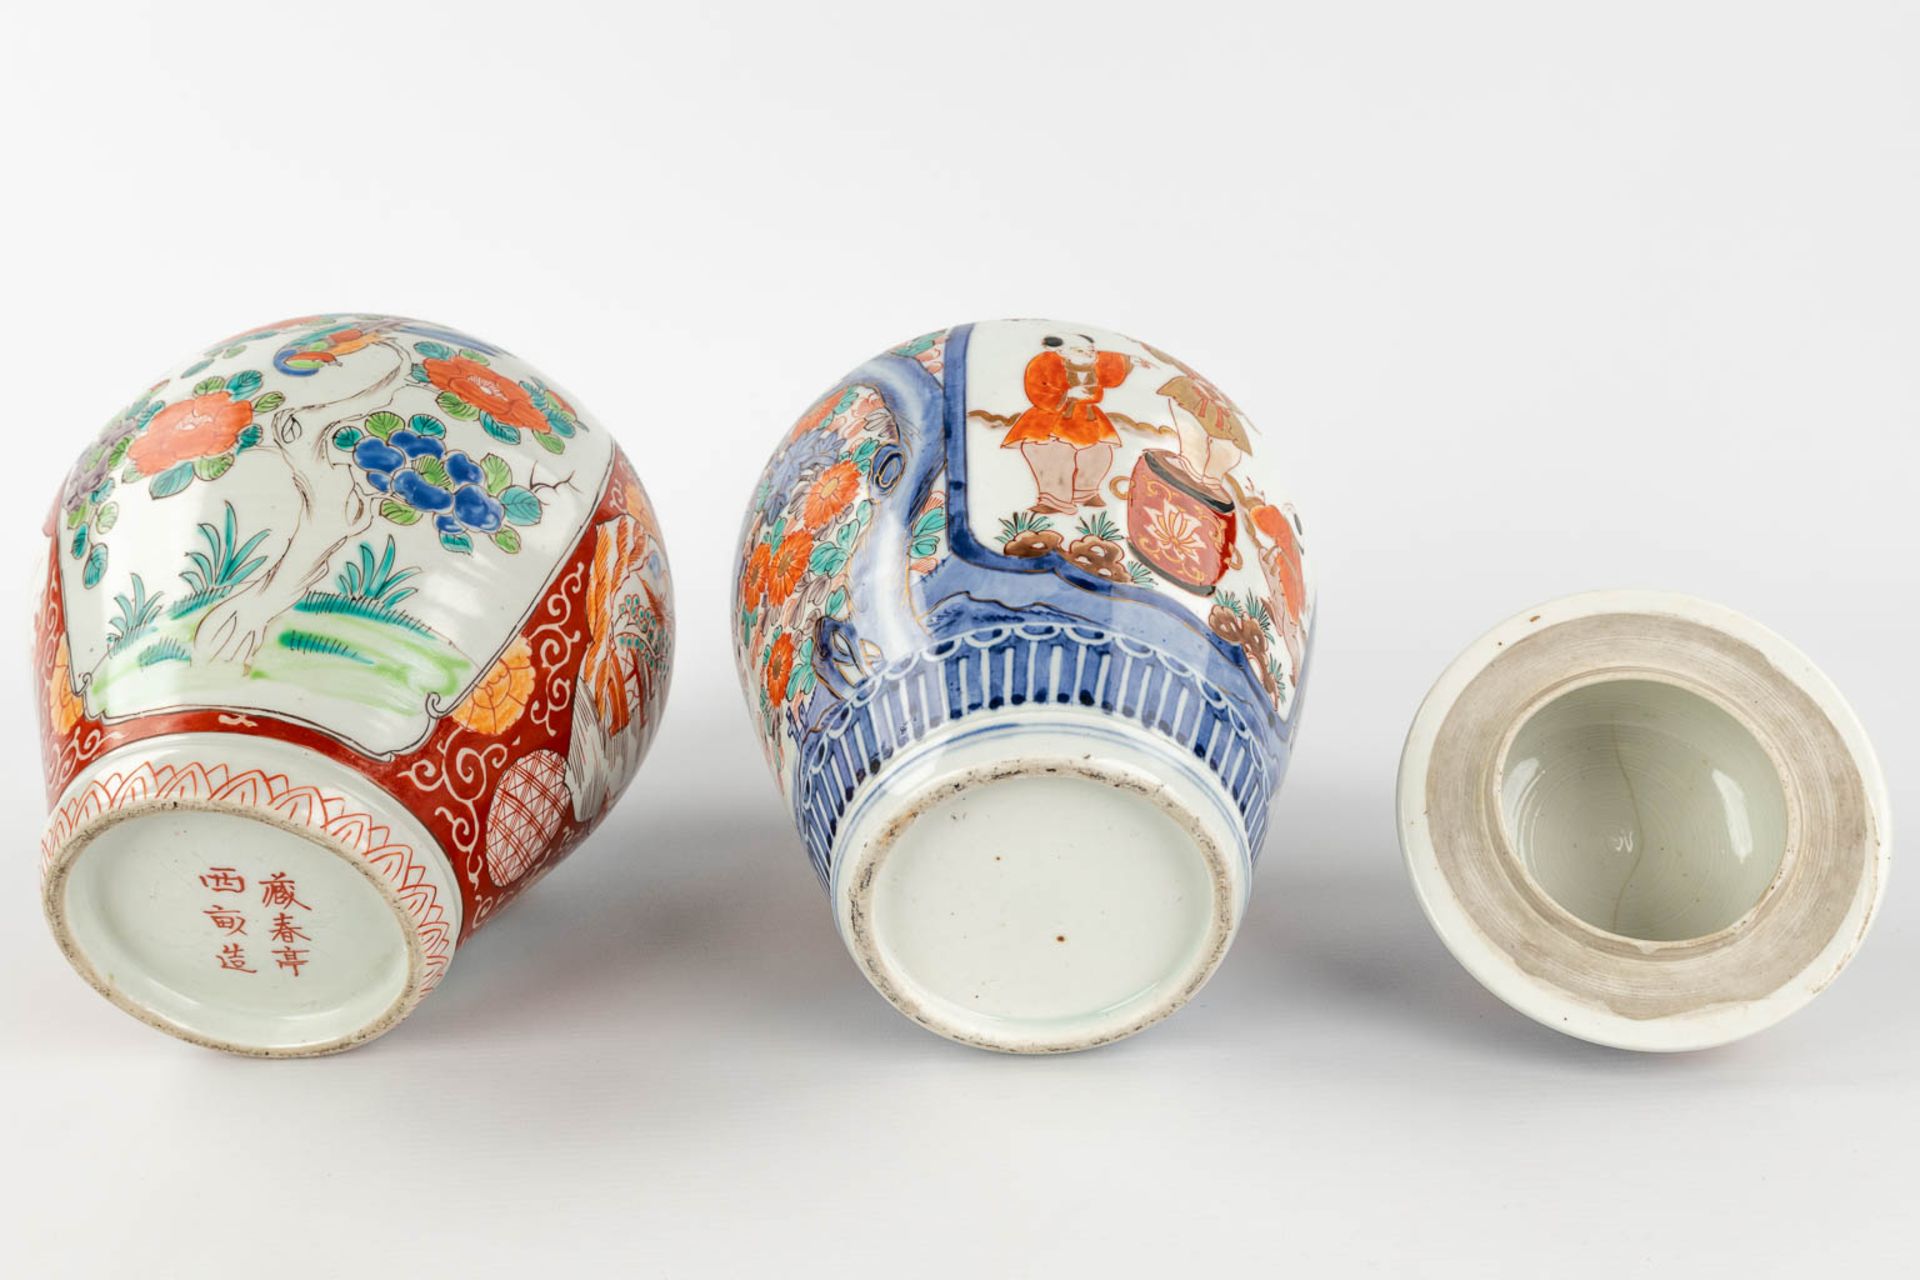 An assembled collection of Japanese Imari and Kutani porcelain. 19th/20th century. (H: 35 x D: 19 cm - Image 14 of 22